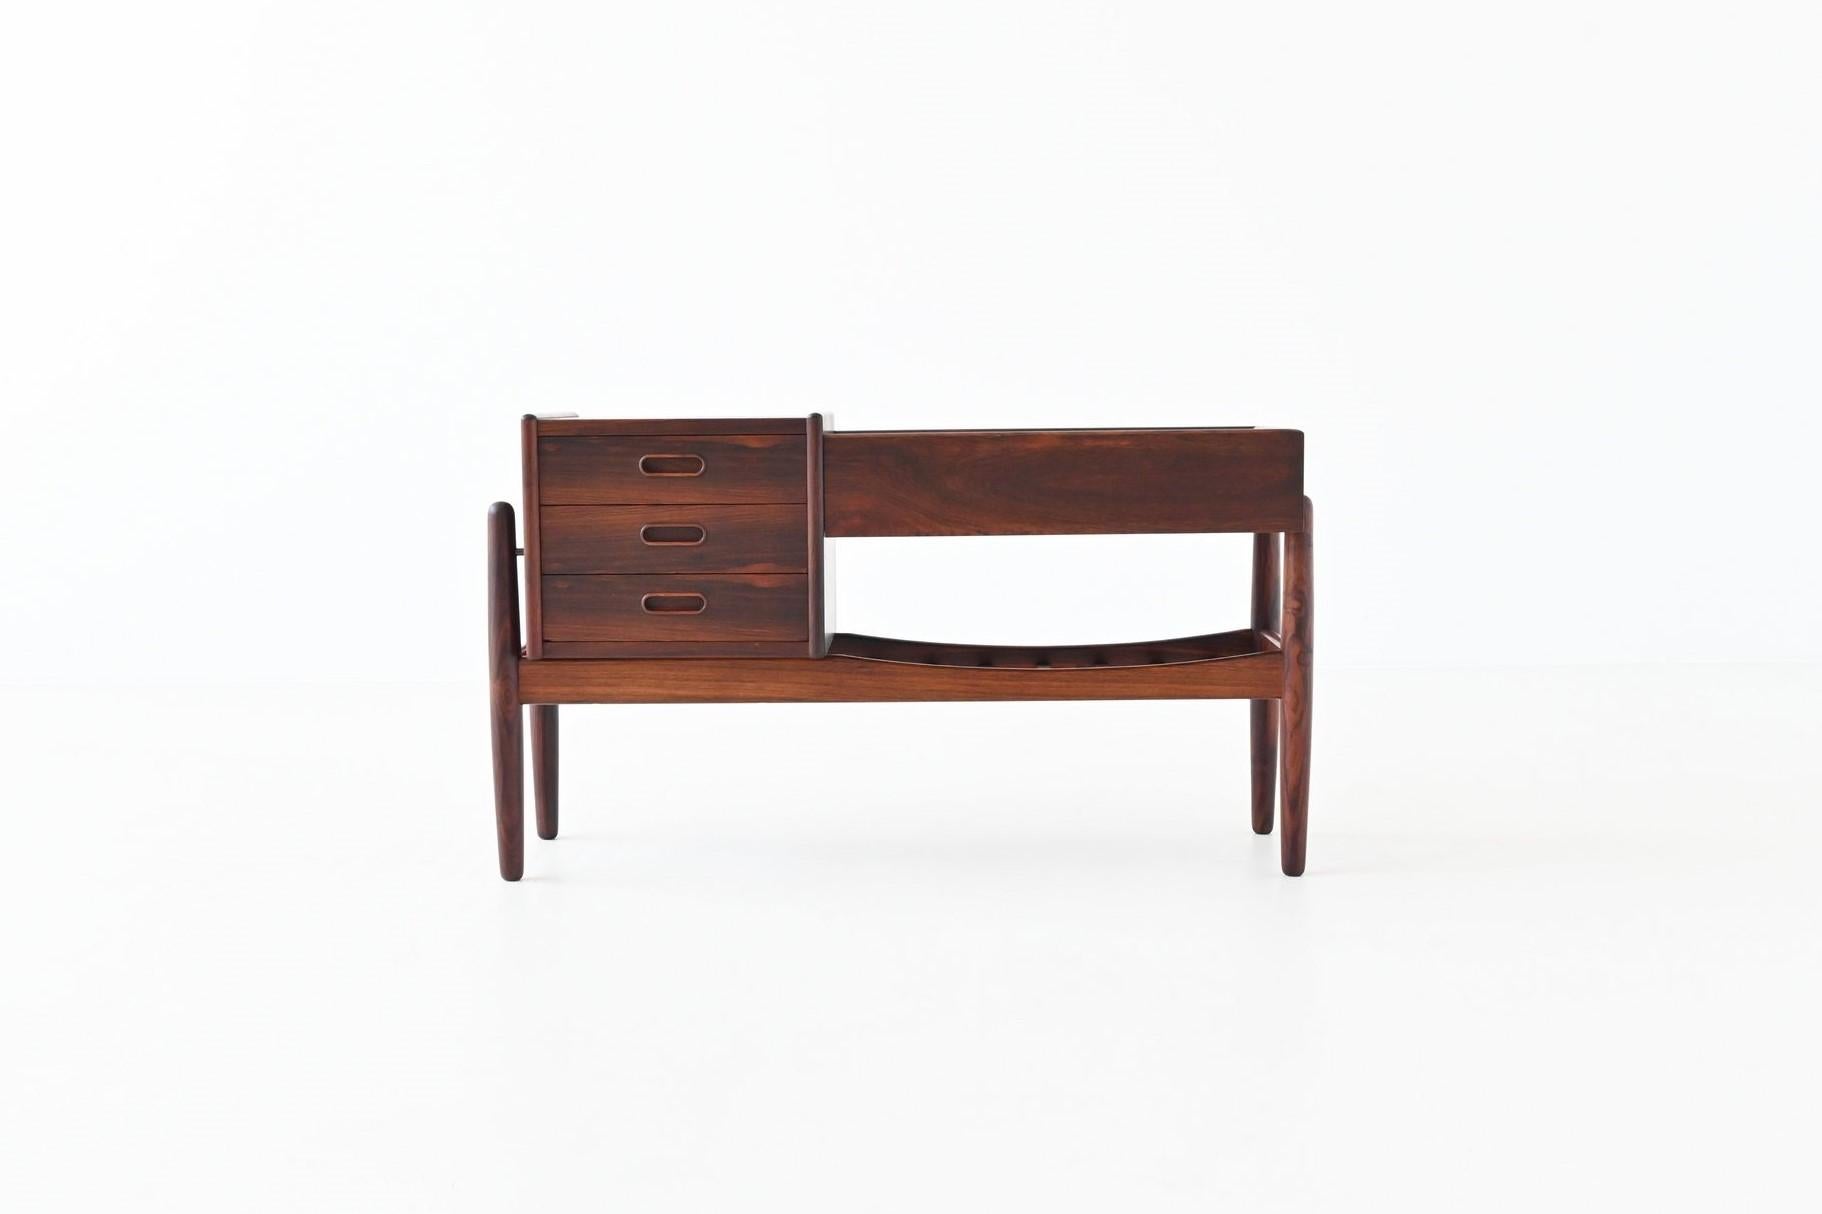 Beautiful shaped small planter table or chest of drawers designed by Arne Wahl Iversen for Vinde Møbelfabrik, Denmark 1961. It is made of veneered and solid rosewood and has a very nice warm grain to the rosewood. It look very decorative with a nice